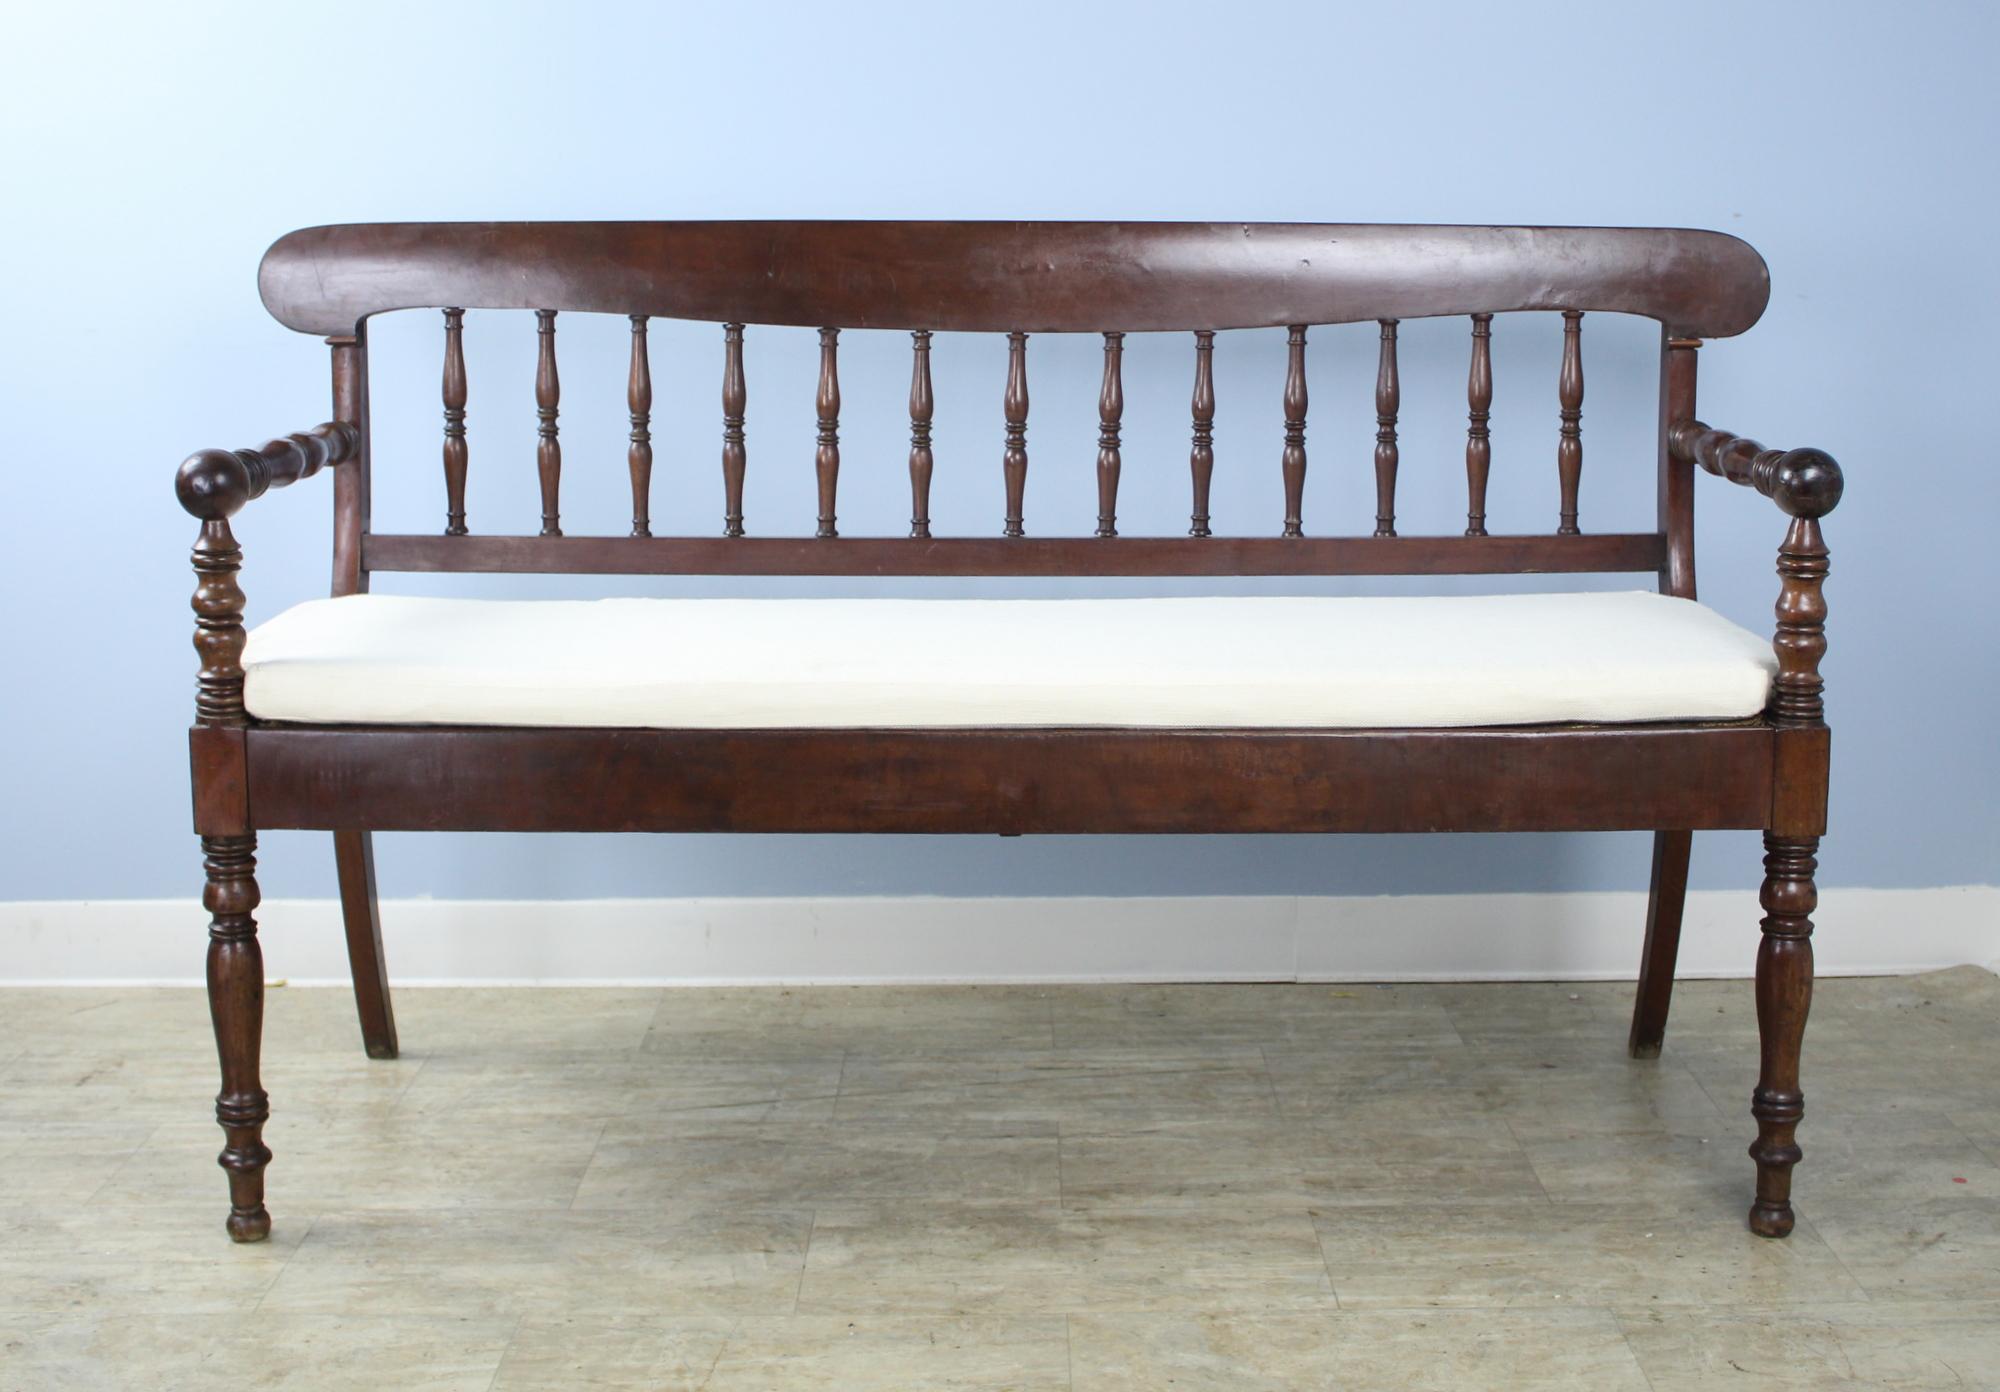 A splendid French bench in dark glossy mahogany. Charming spindle back and turned front legs are accented by graceful flared back legs.  There are some small areas of wear on the backrest.   Sturdy and comfortable, with new strapping supports and